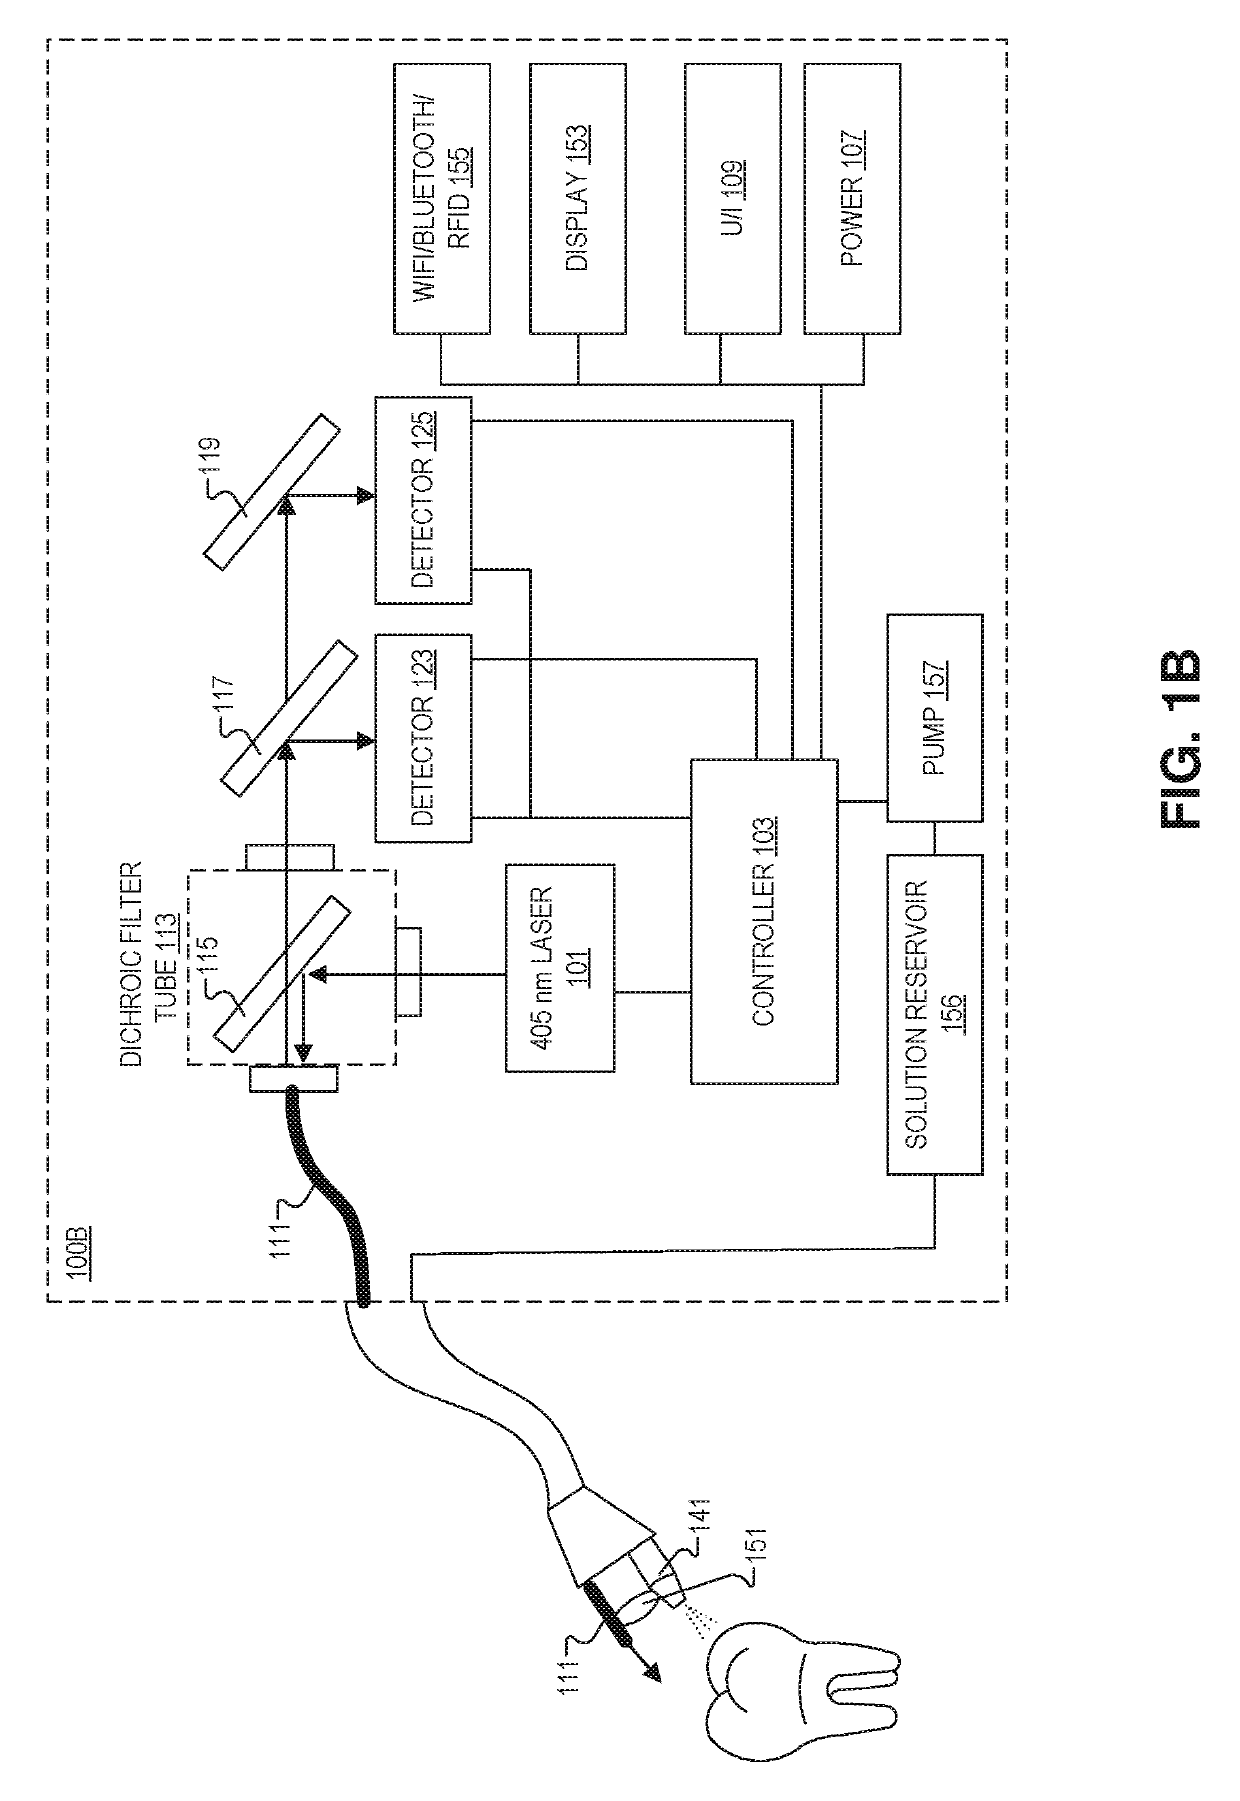 System and method for ranking bacterial activity leading to tooth and gum disease